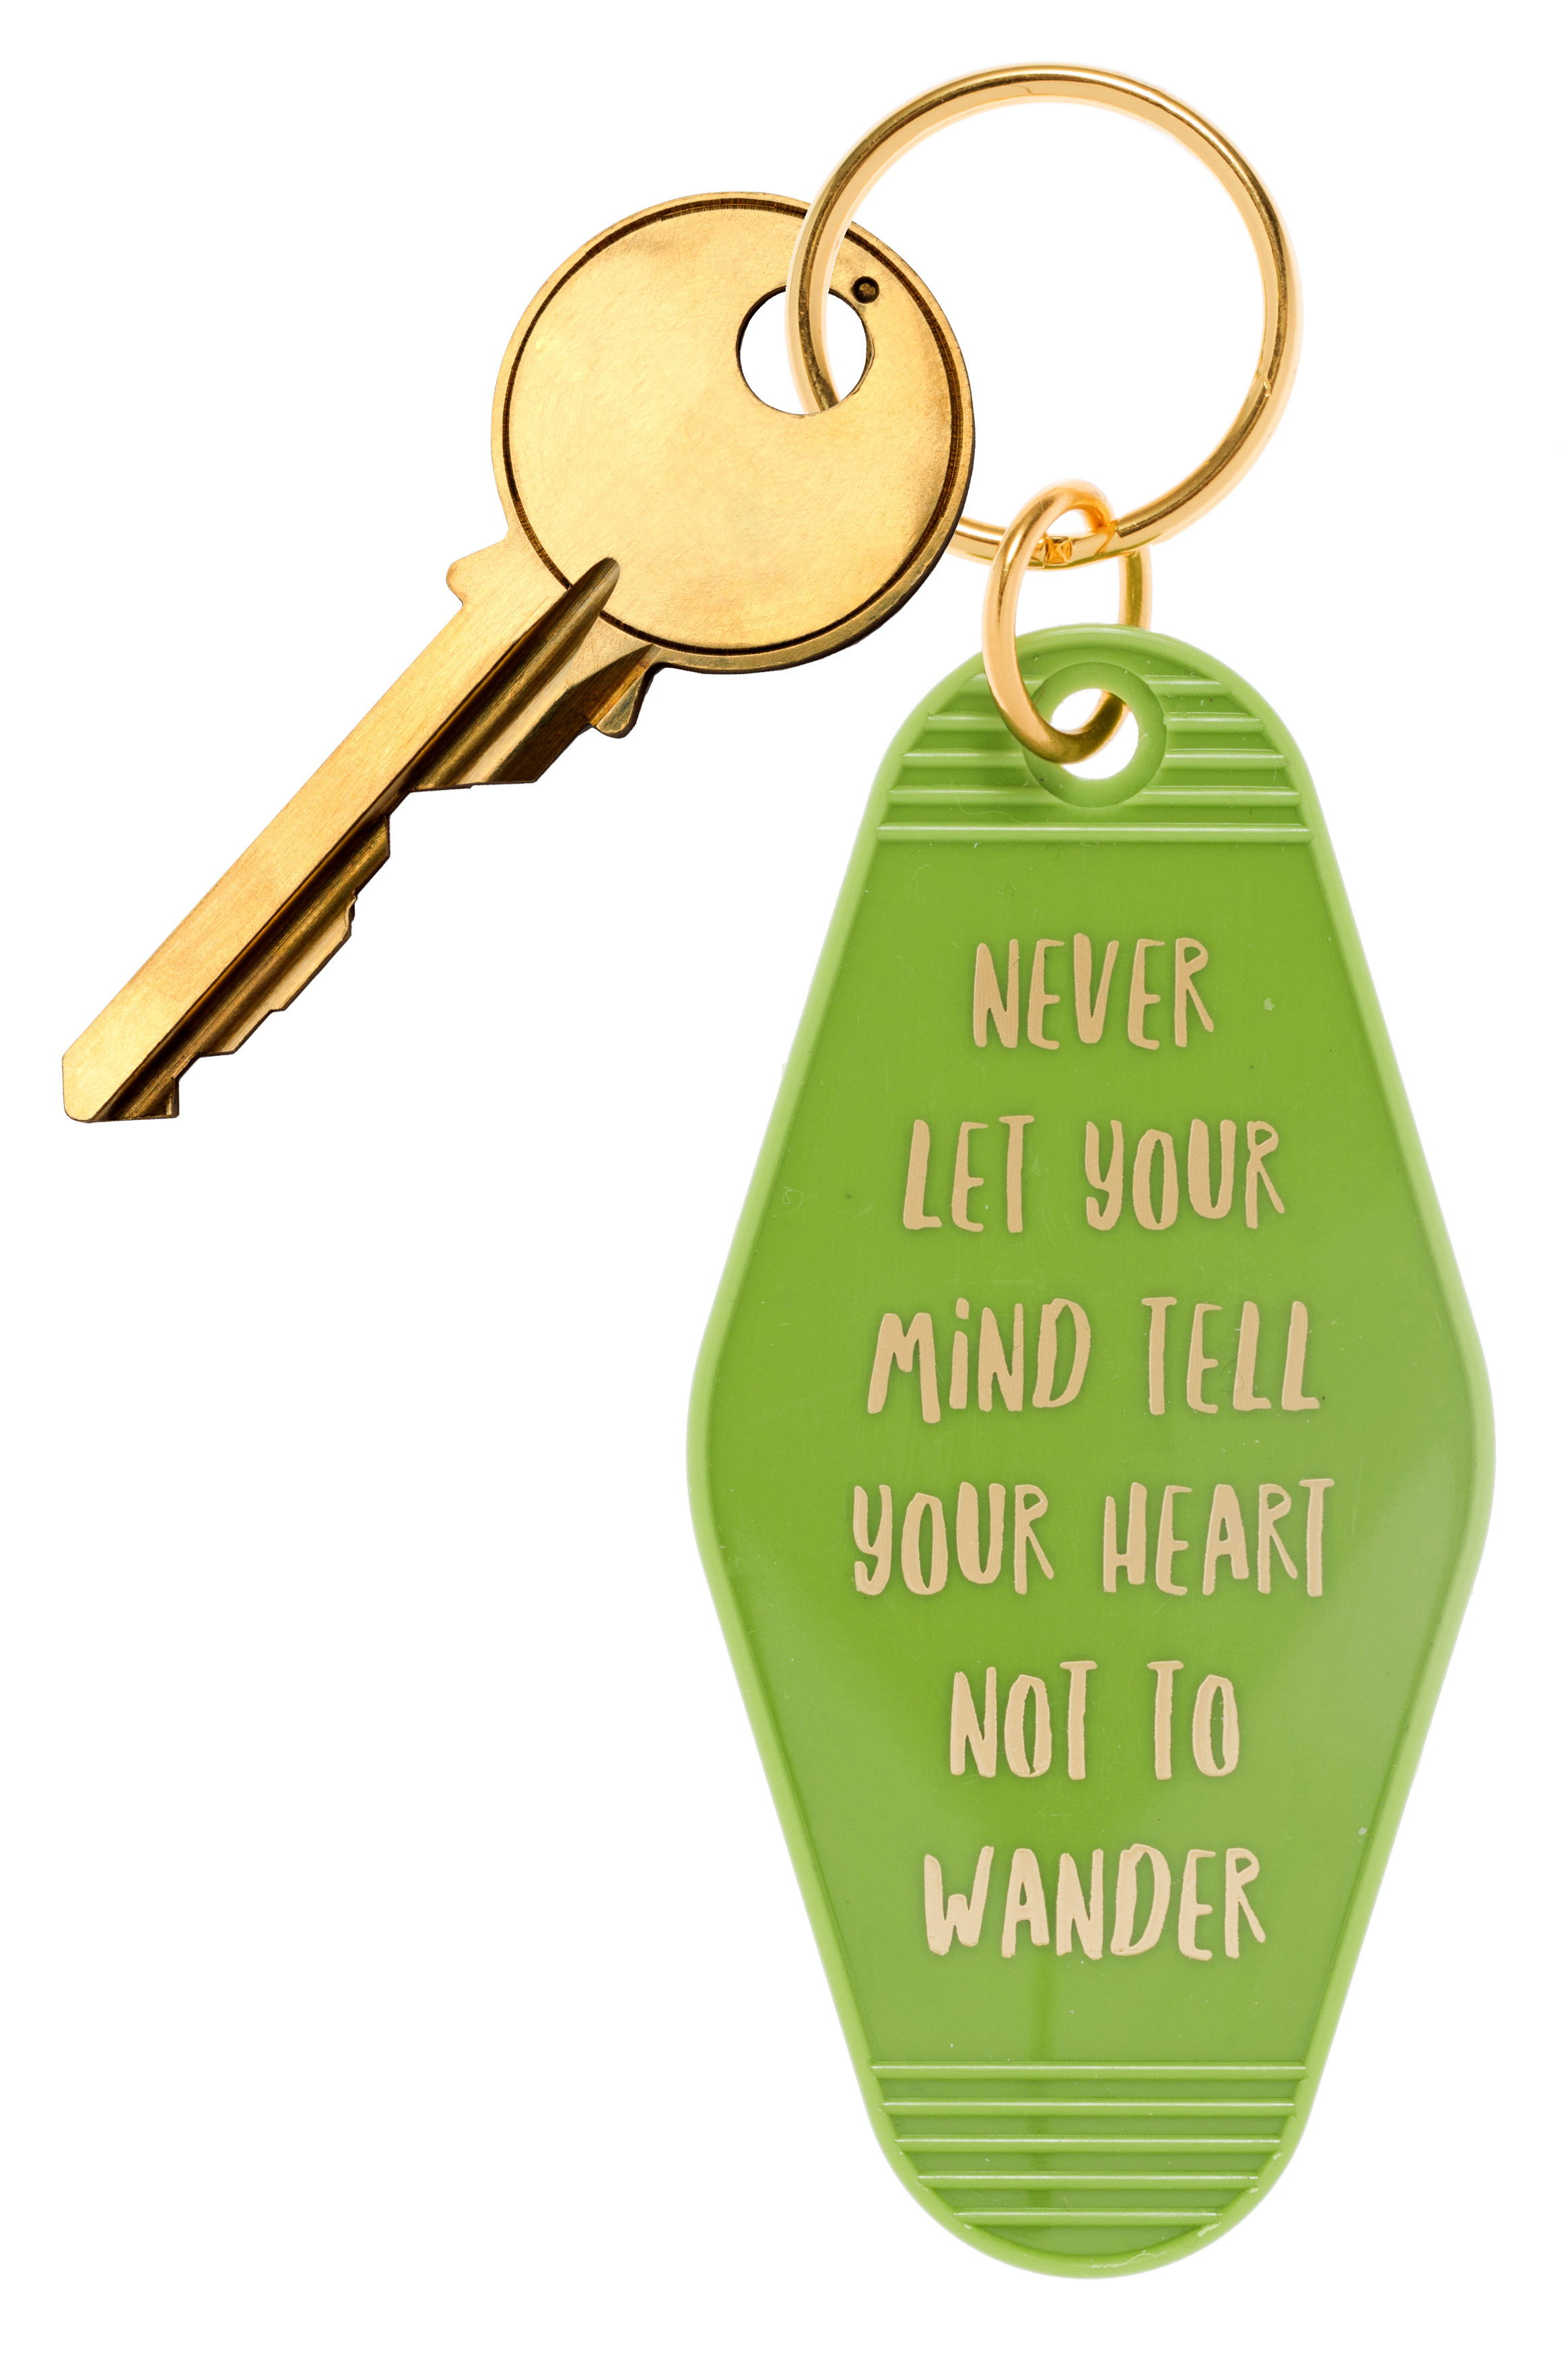 Retro Motel Style Keychain - "Never Let Your Mind Tell Your Heart Not To Wander"